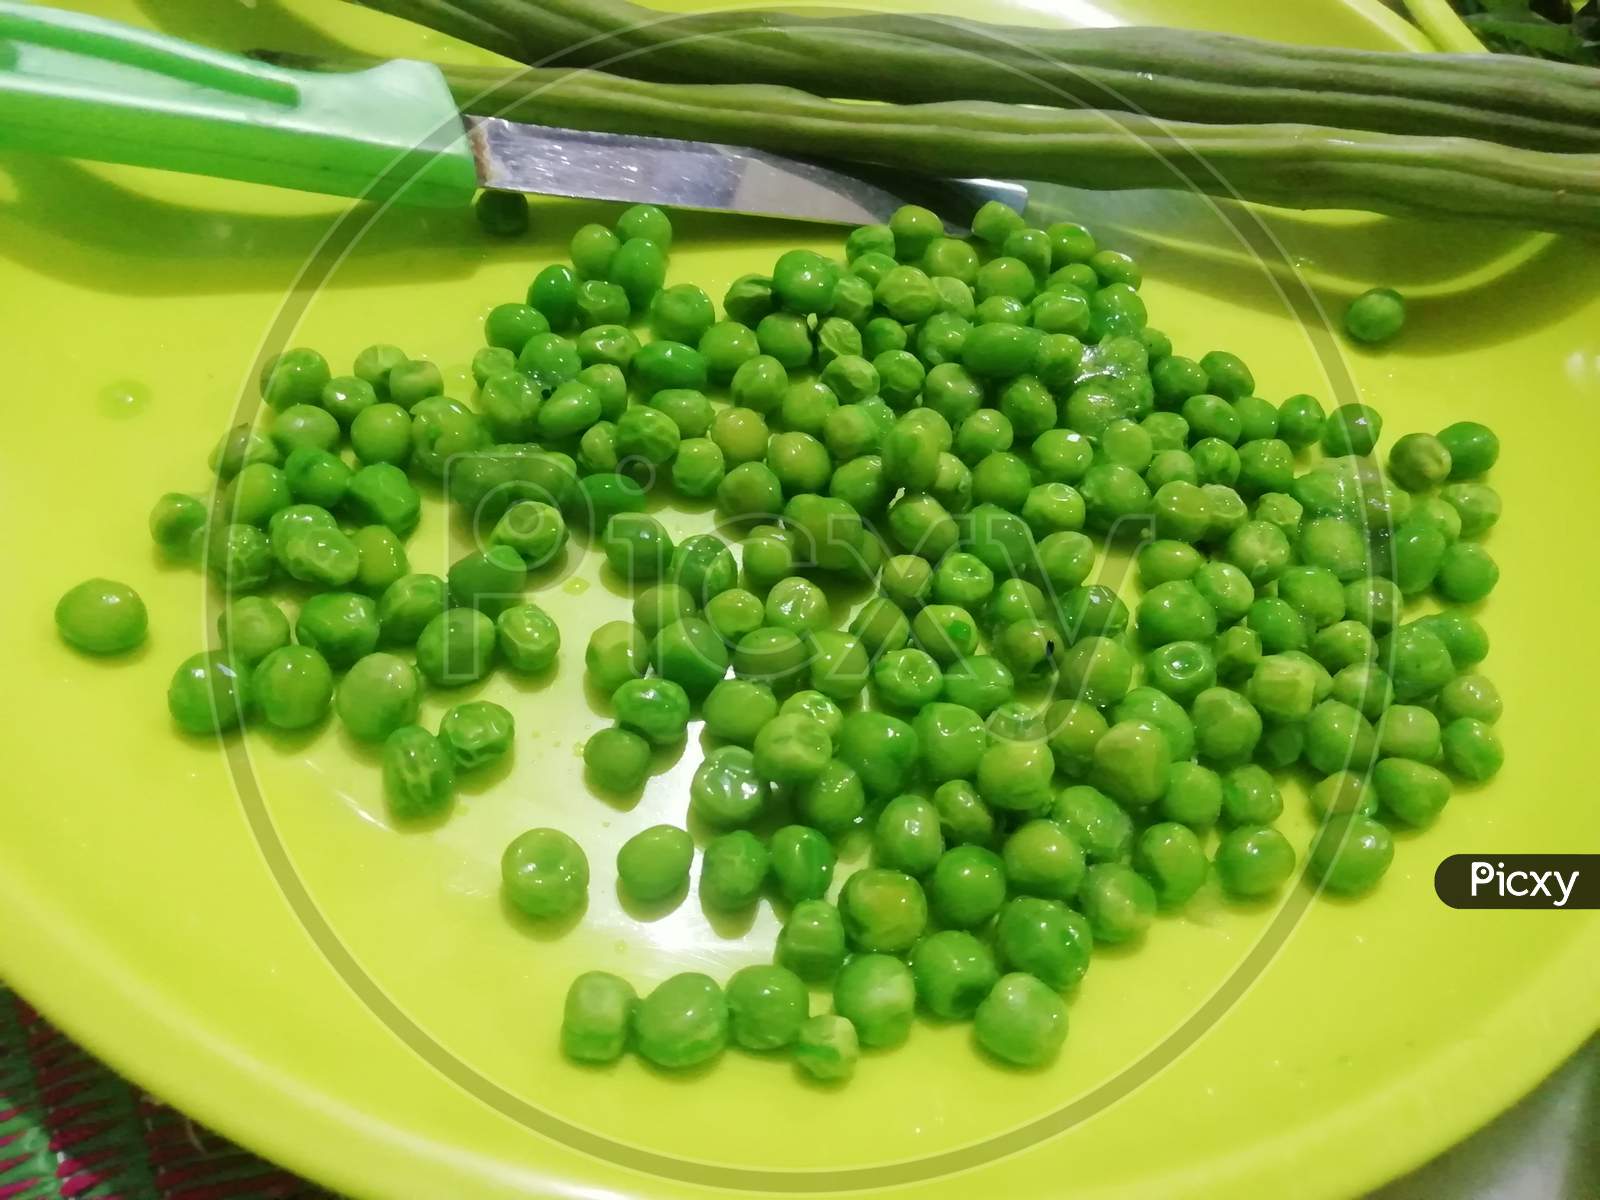 Green peas in a yellow plate